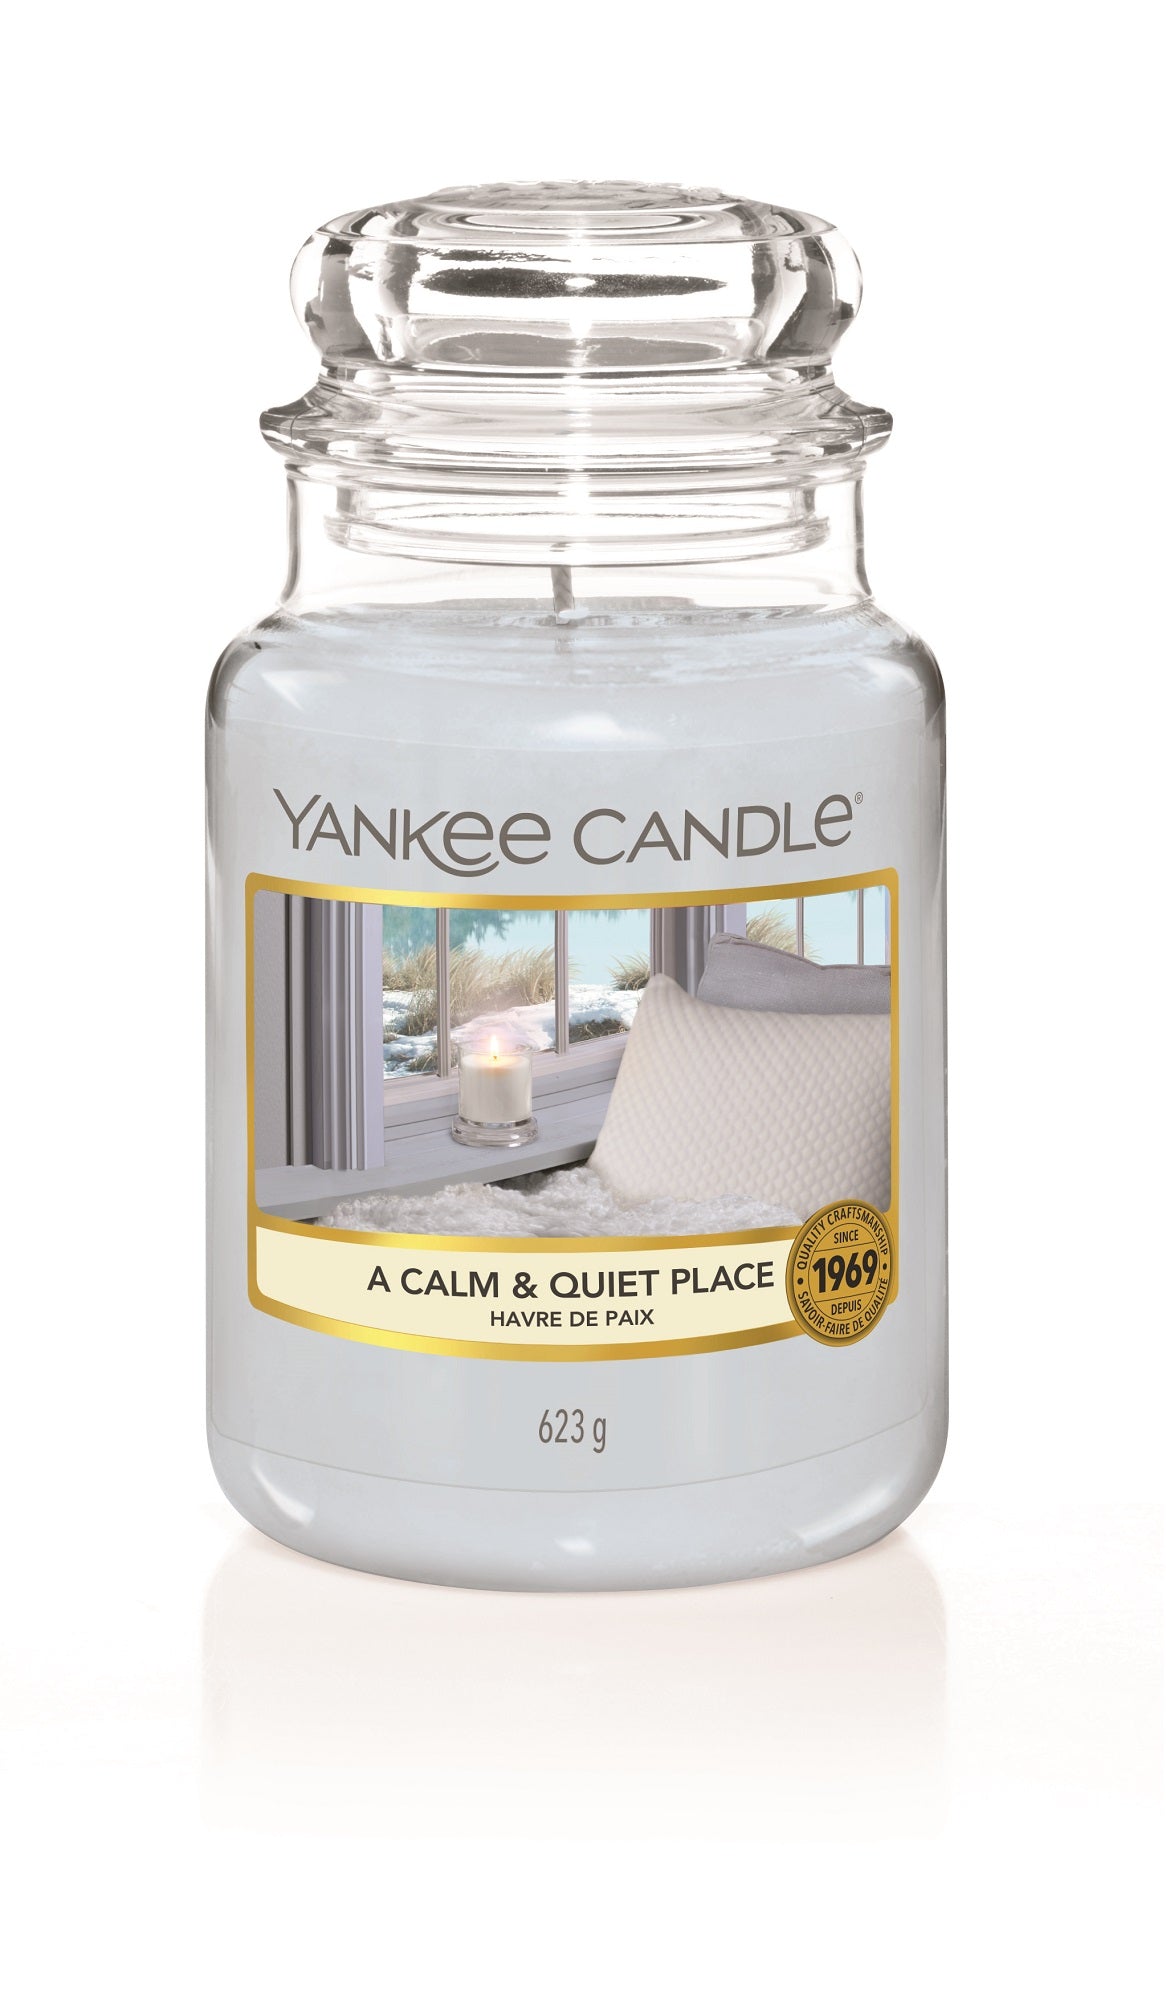 Yankee Candle Large Jar - A Calm & Quiet Place